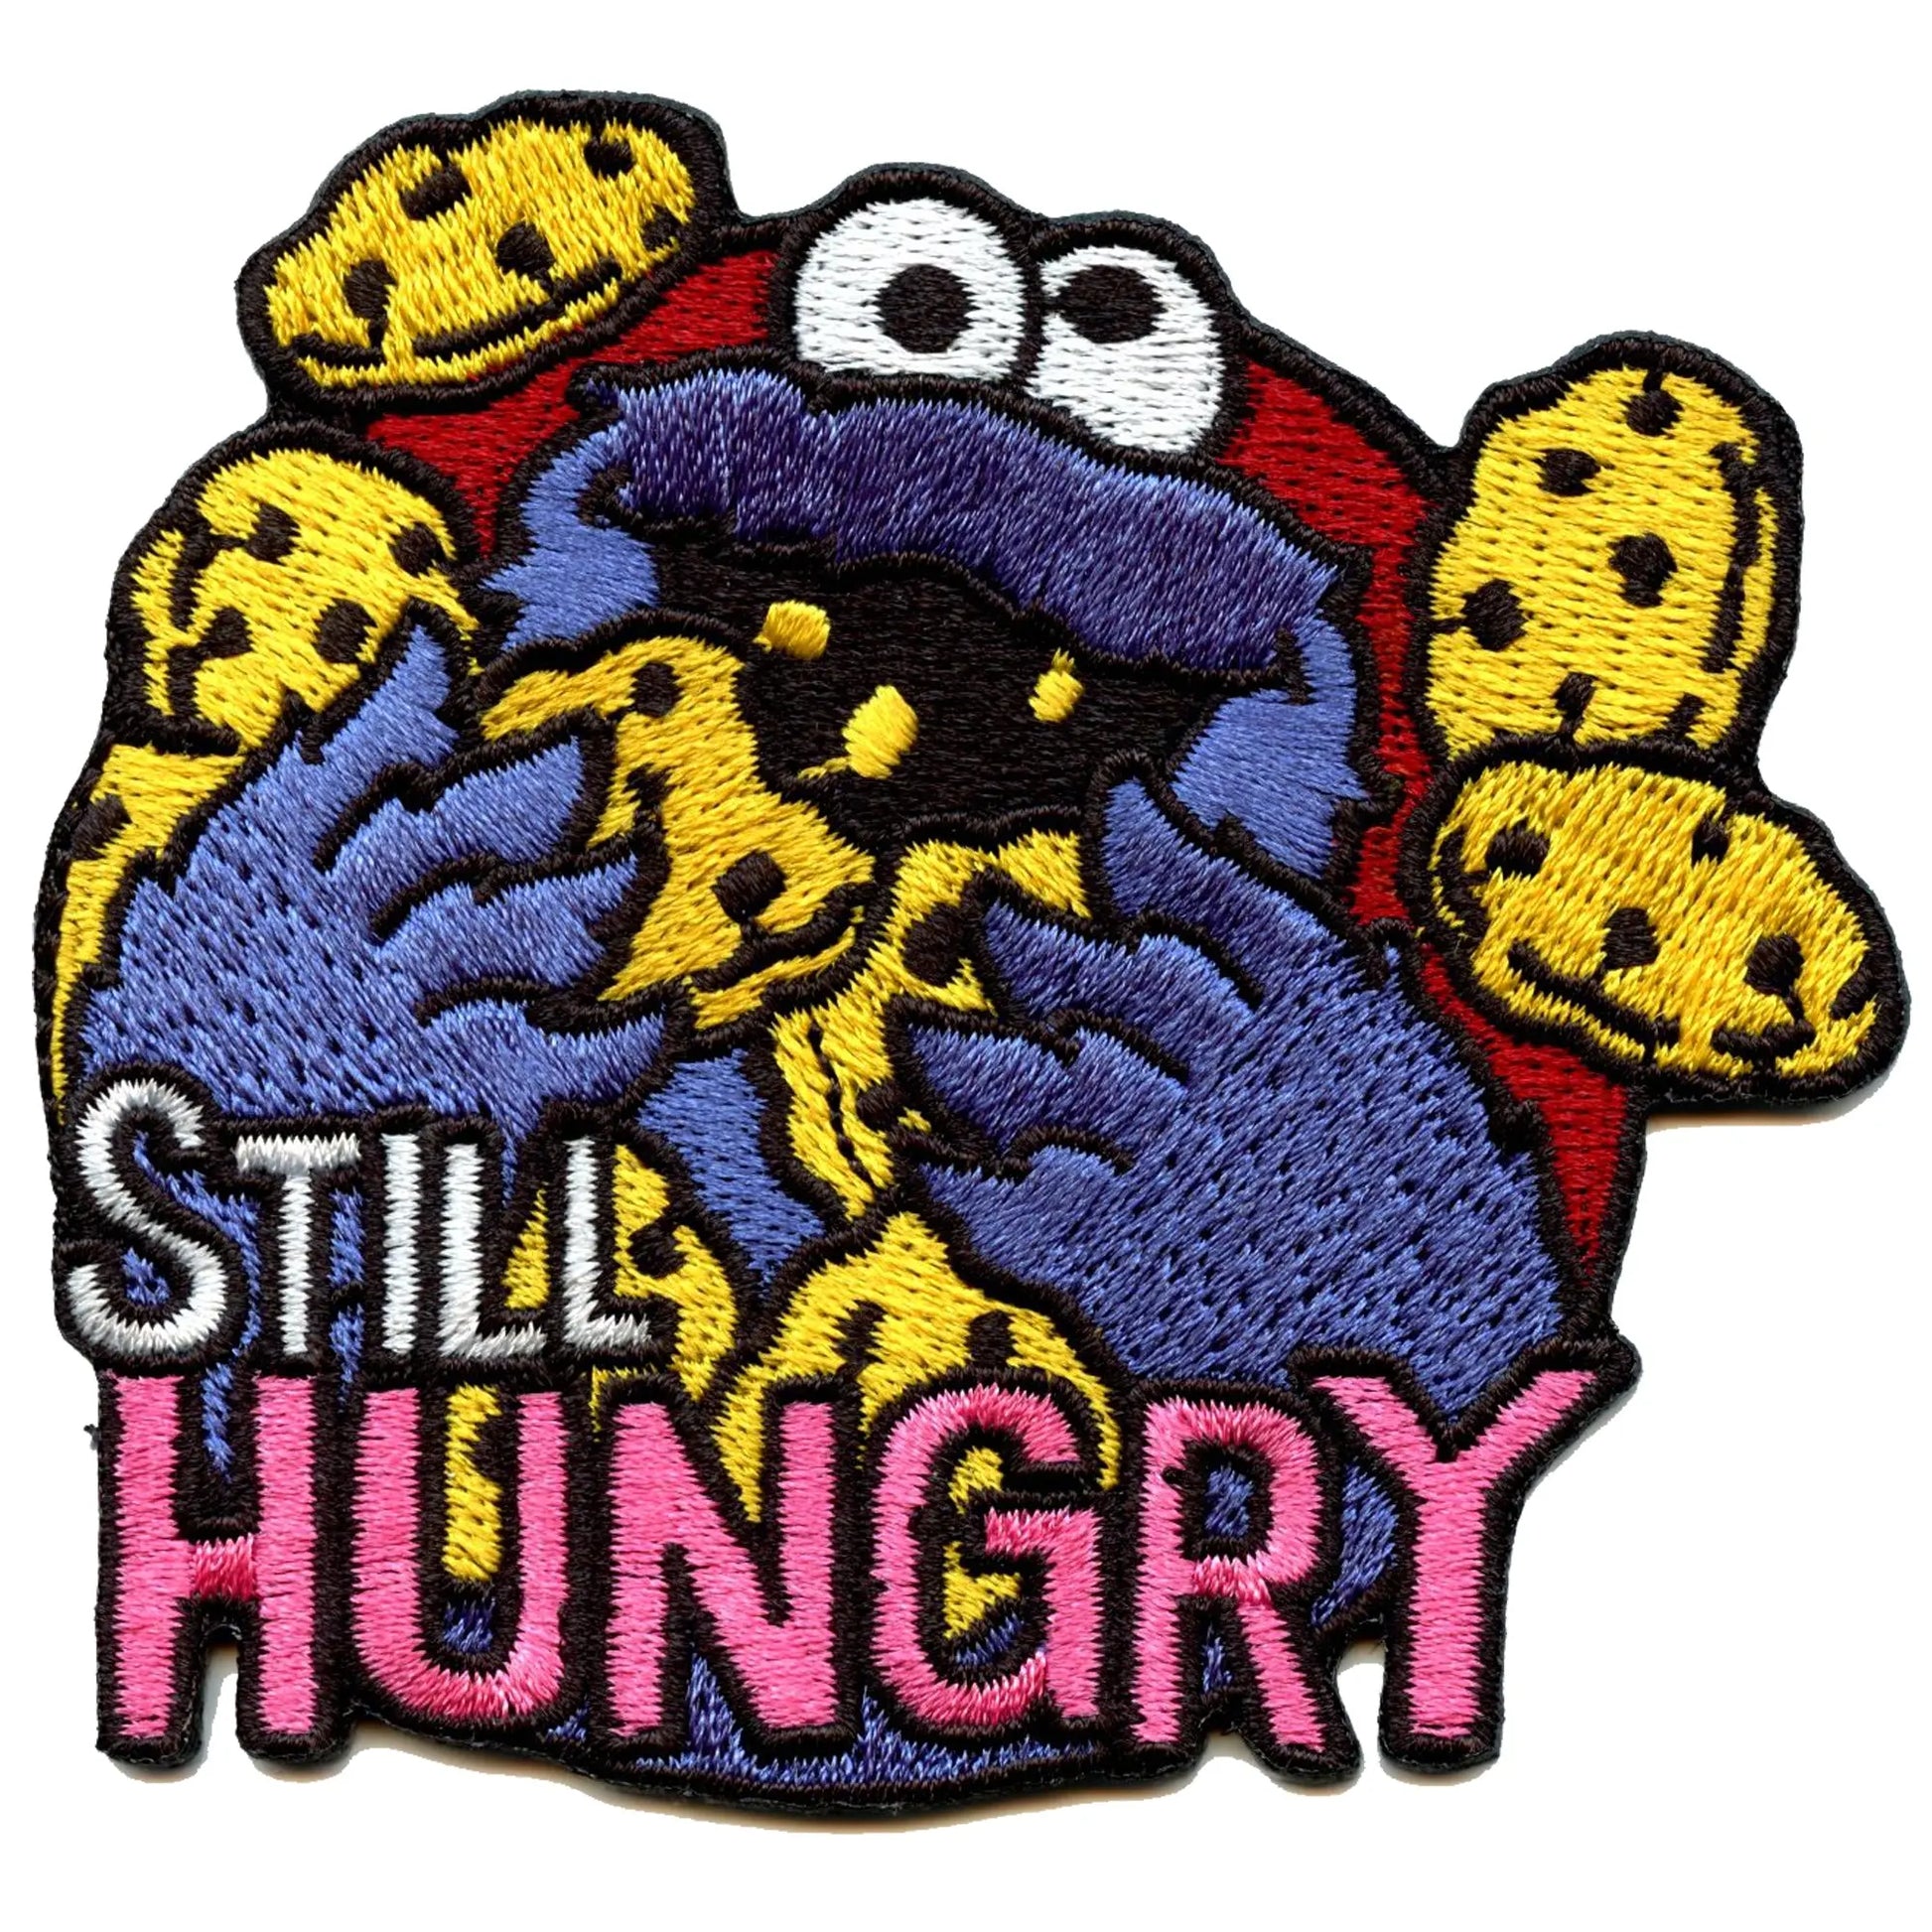 Cookie Monster "Still Hungry" Embroidered Iron On Patch 